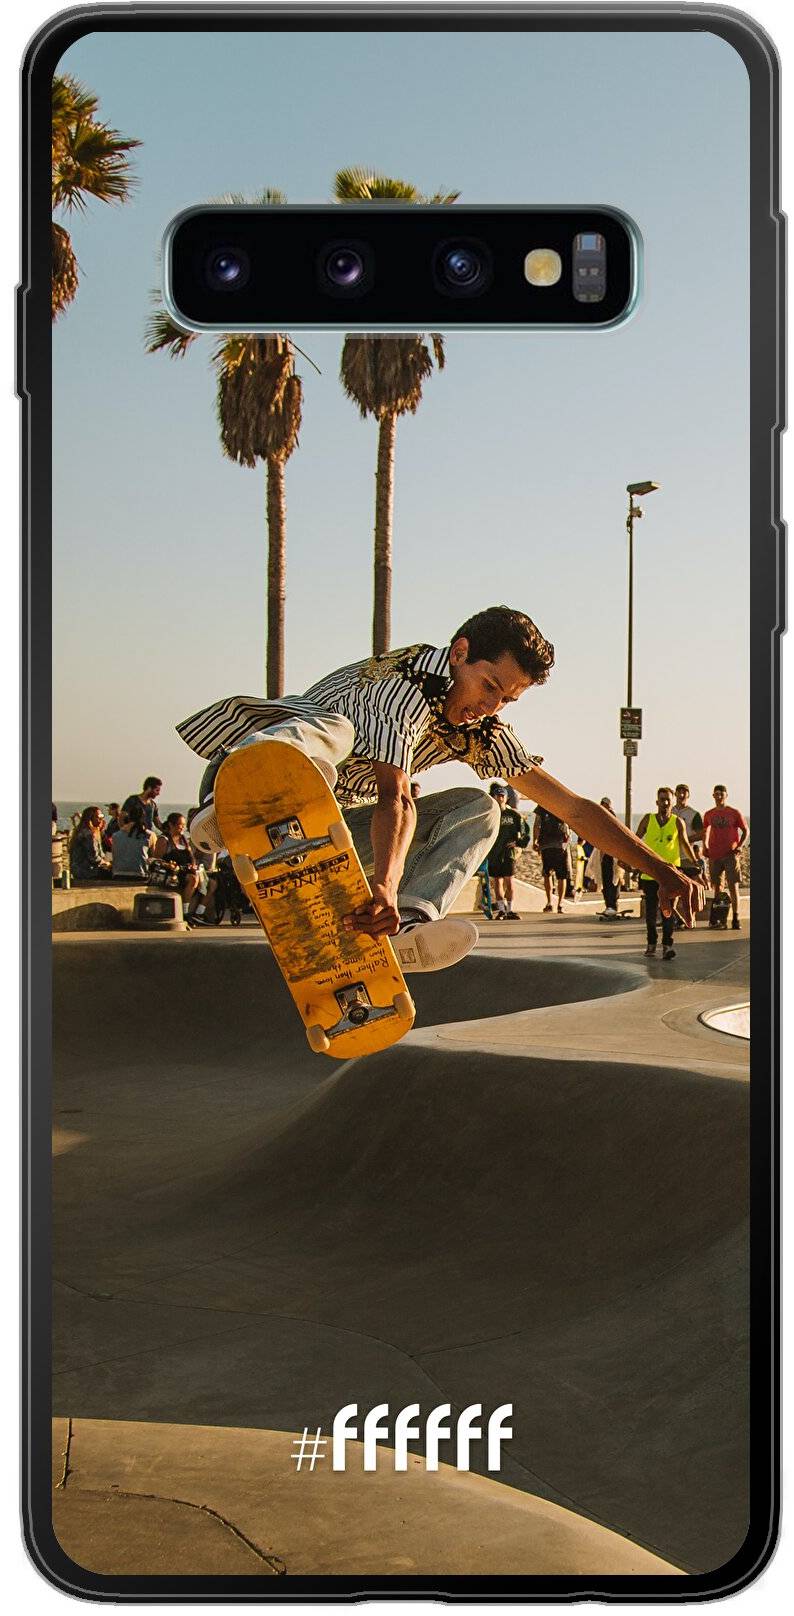 Let's Skate Galaxy S10